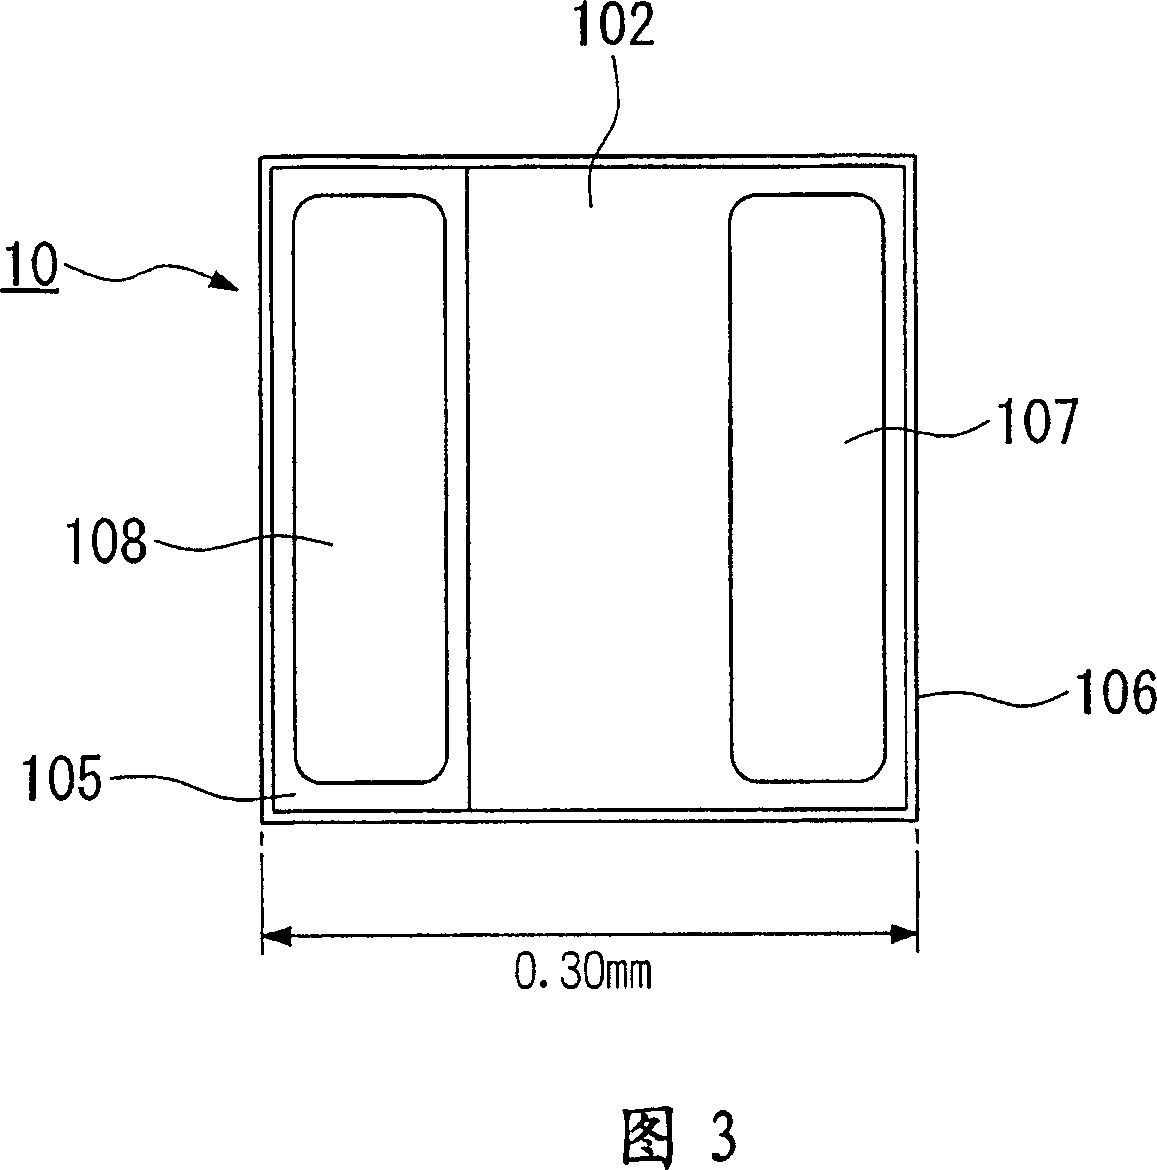 Compound semiconductor light-emitting device and method of producing same